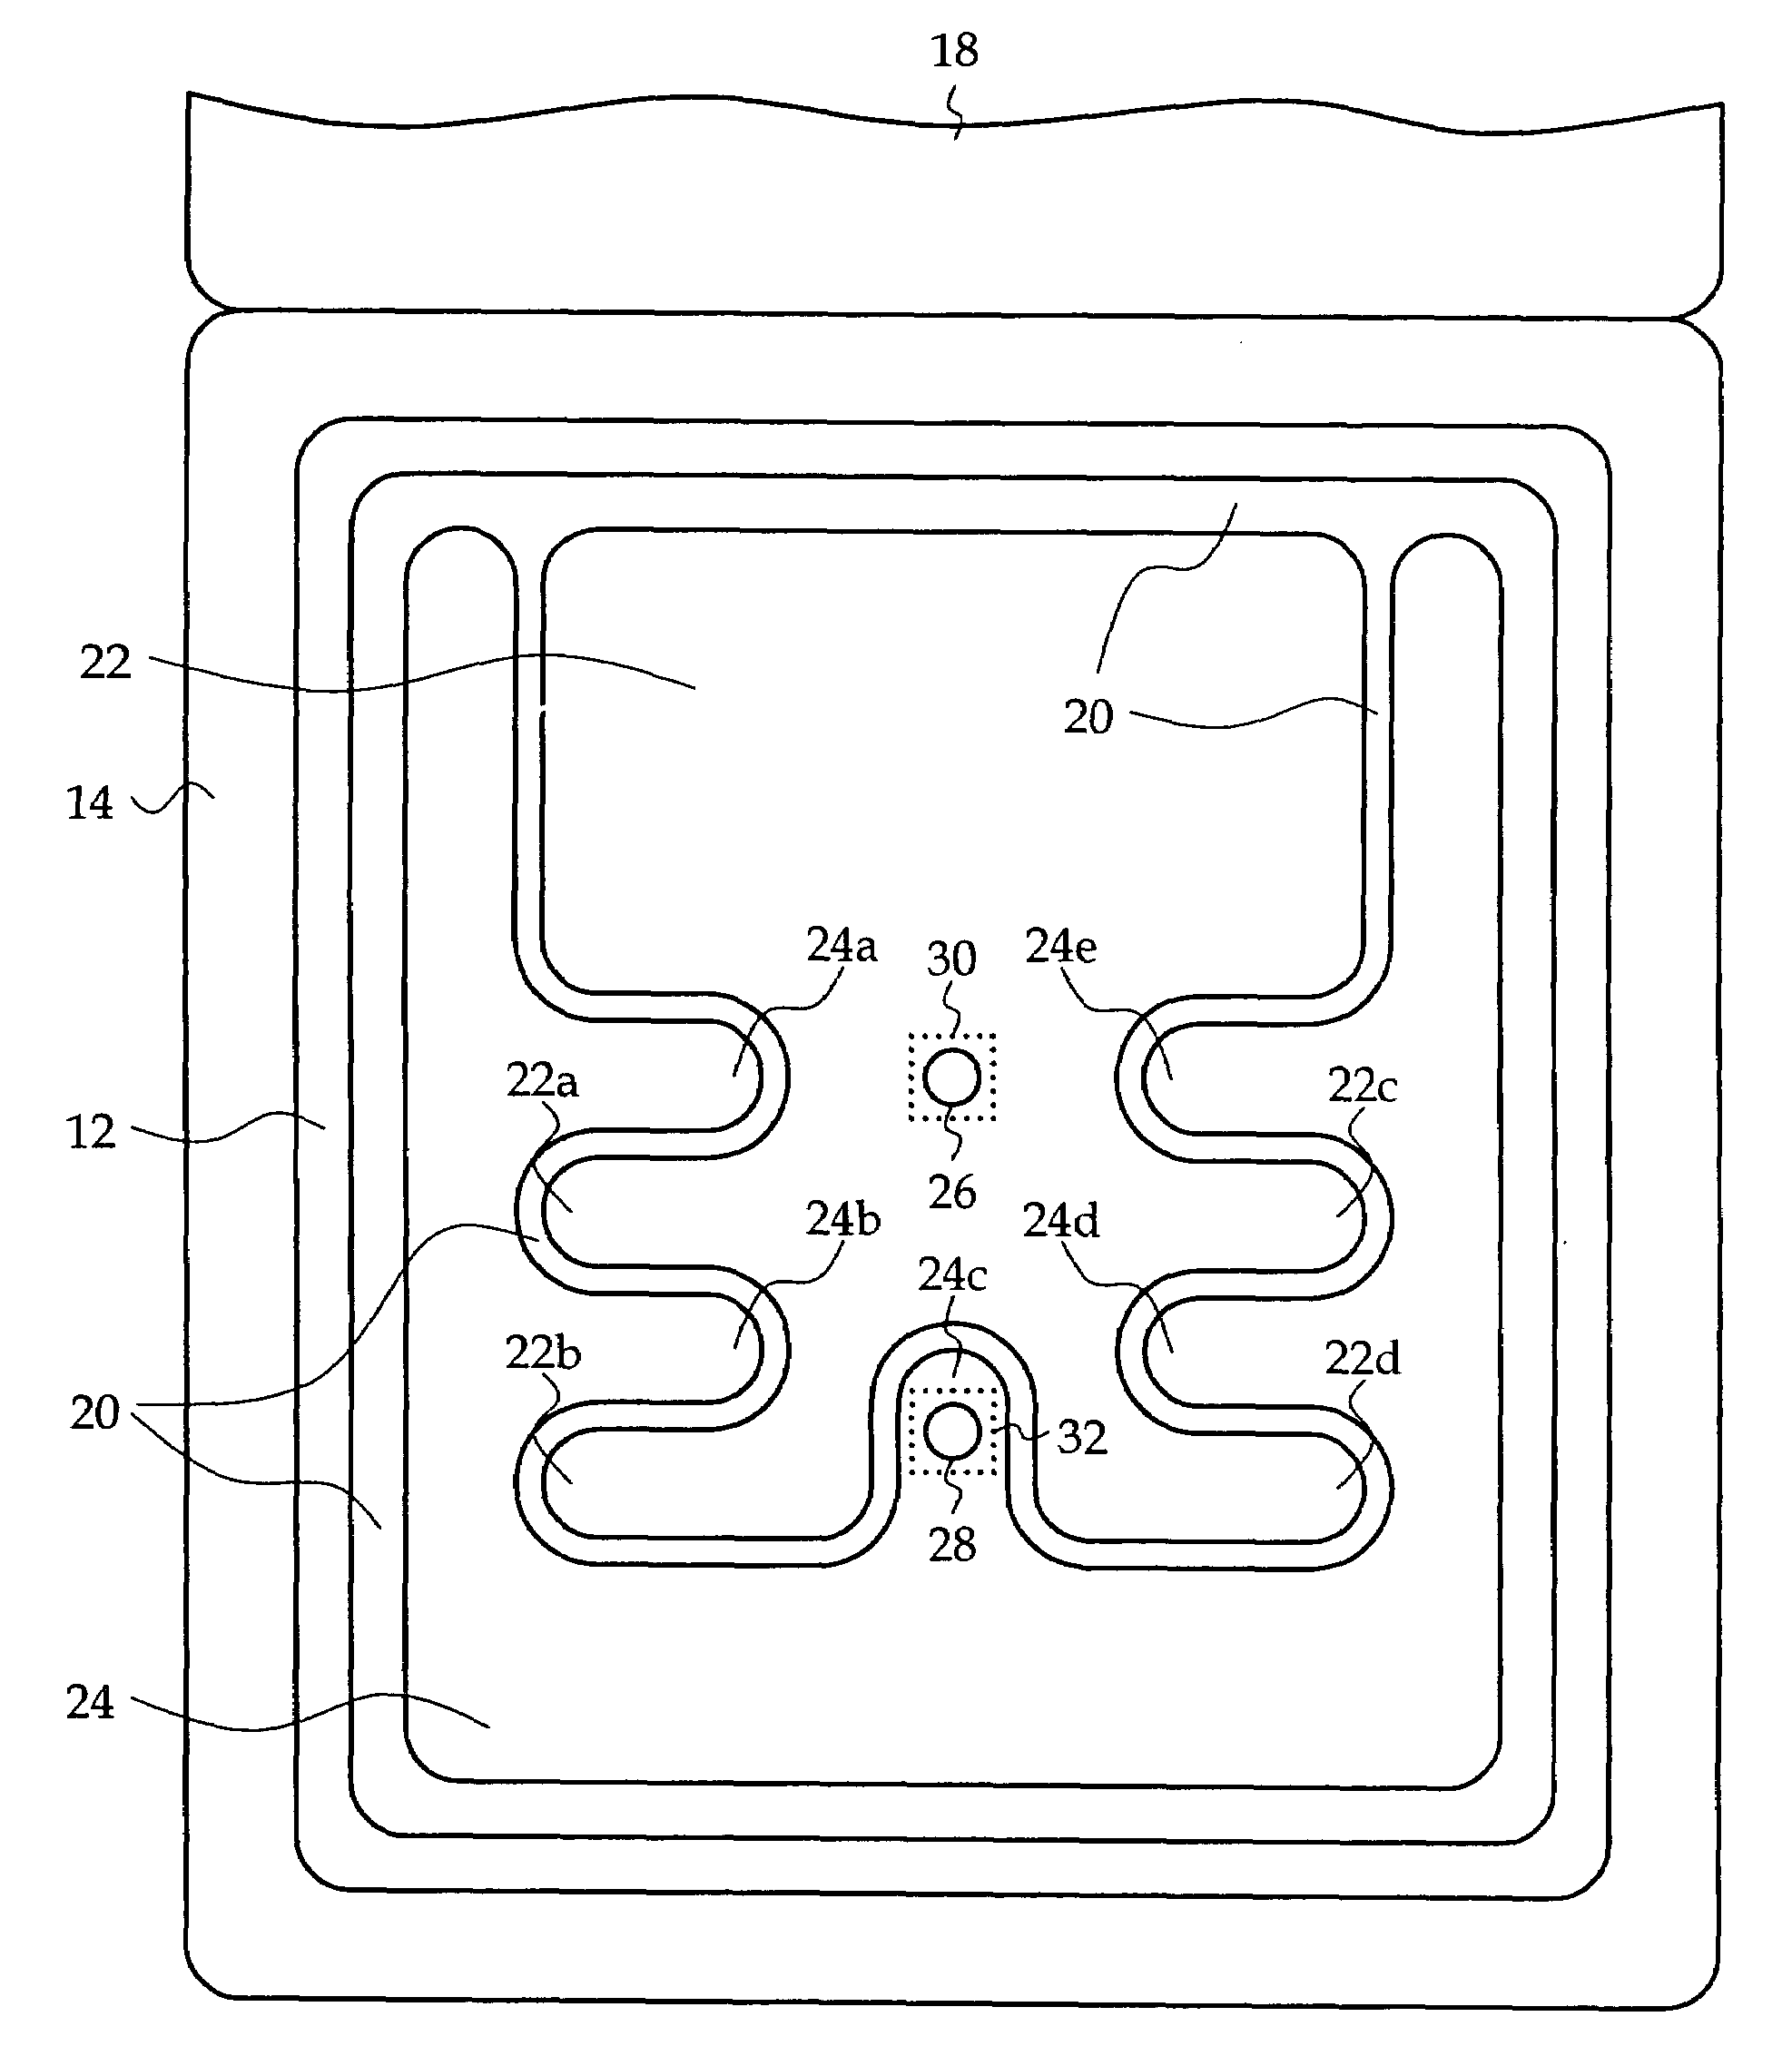 Dual interdigitated chamber seat bladder for occupant position and weight estimation